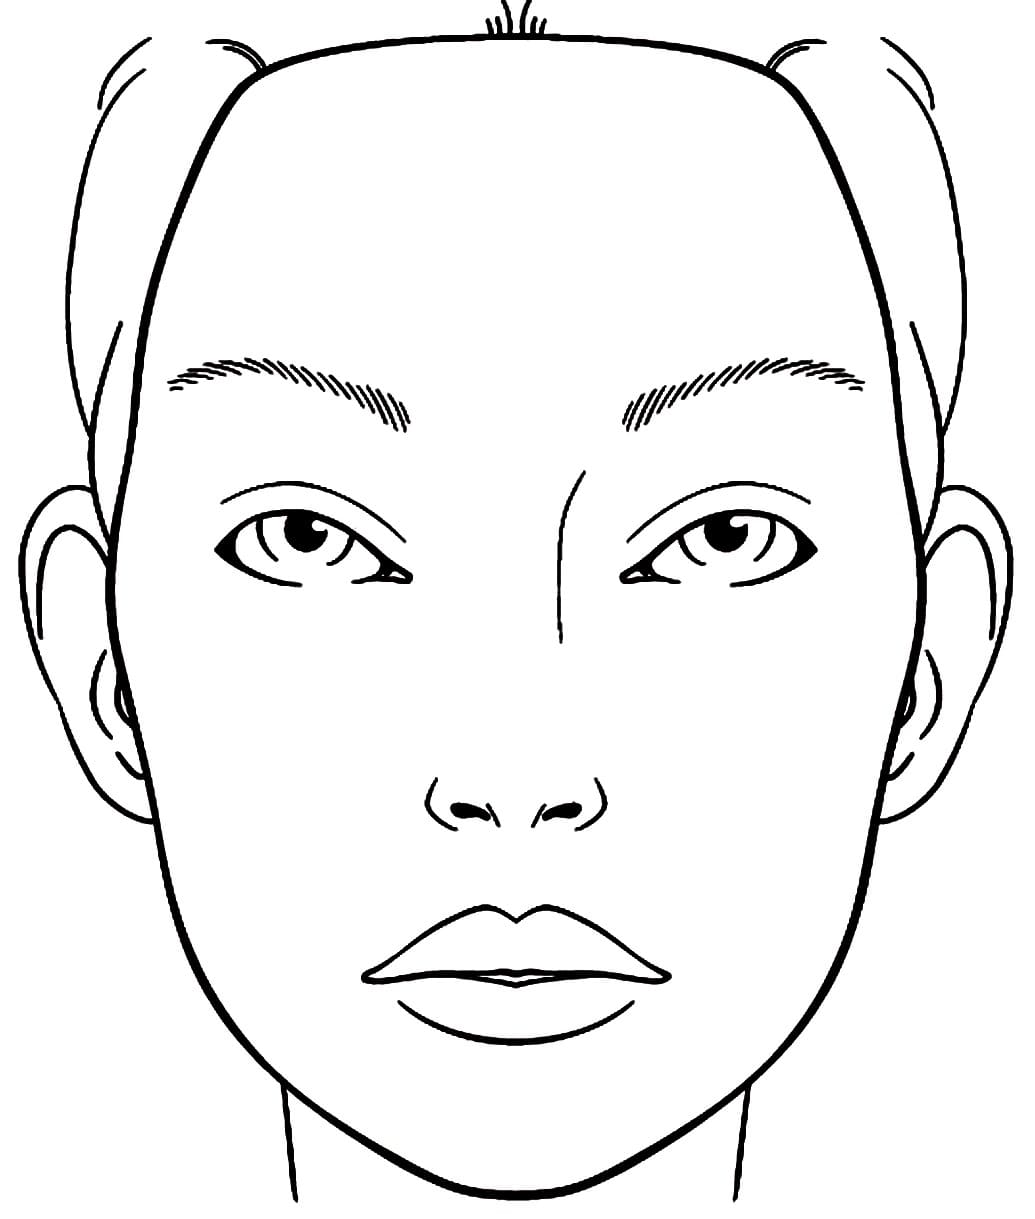 Makeup Face Coloring Page - Free Printable Coloring Pages for Kids